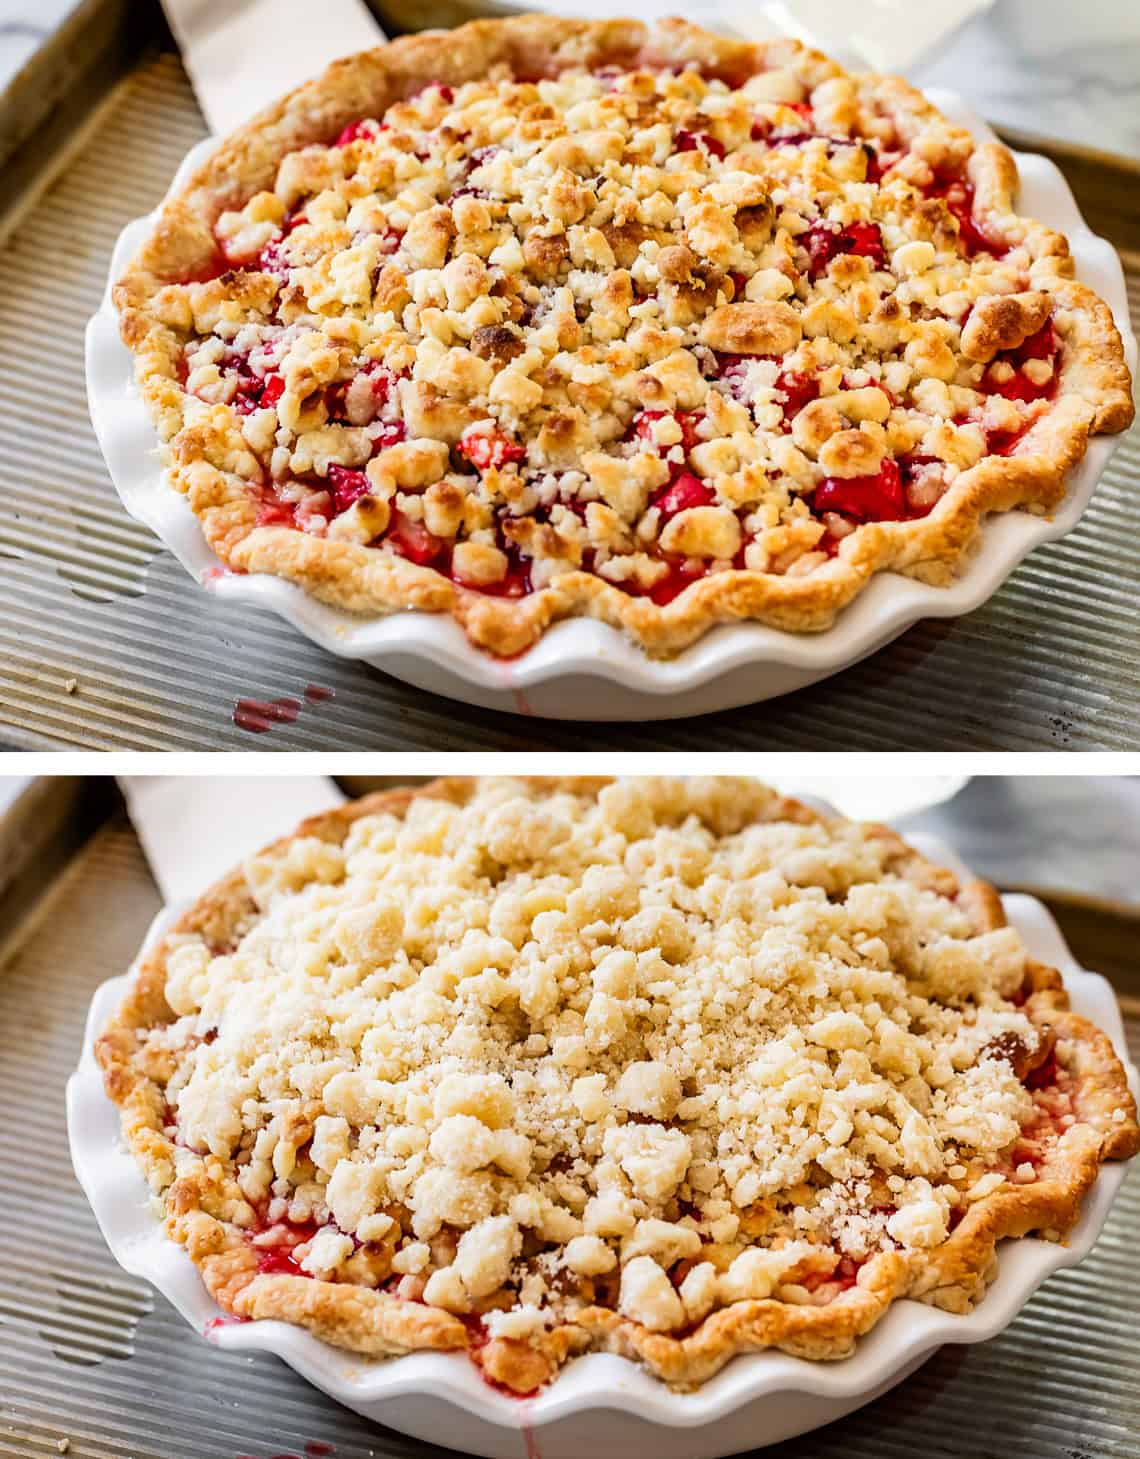 top pic: pie with some baked streusel on top, bottom more streusel added on top of already baked.